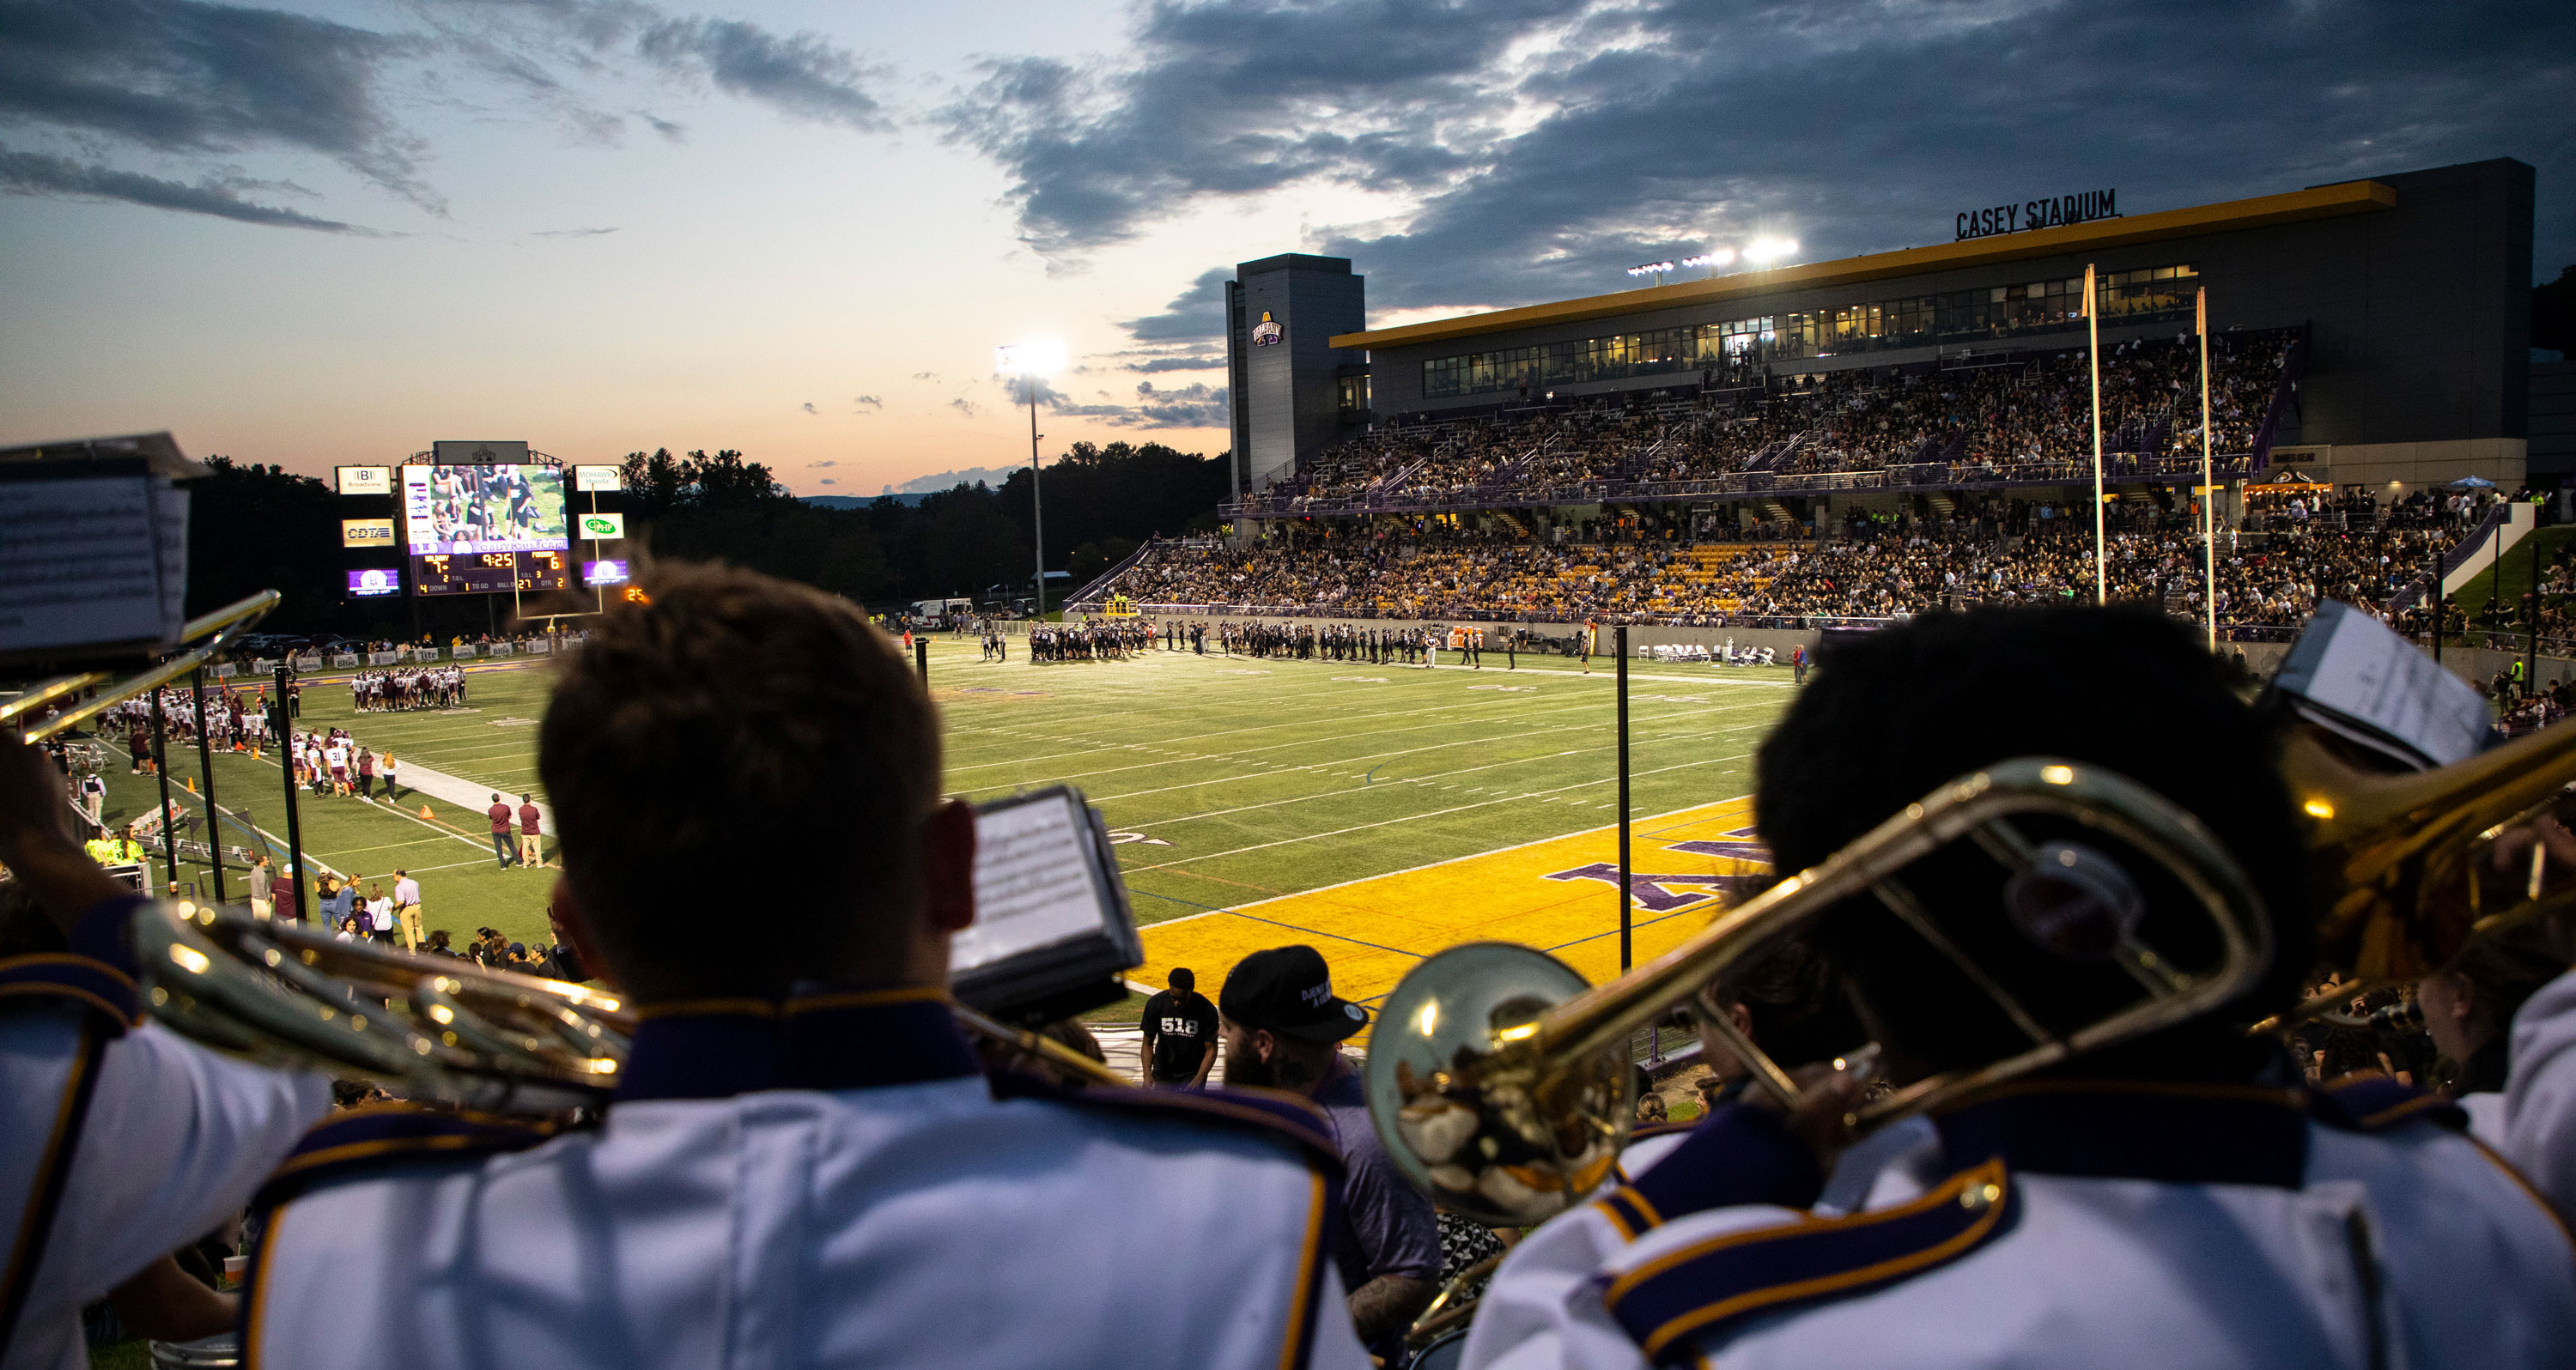 The Marching Great Danes perform in uniform on the edge of the field at Casey Stadium at sunset.